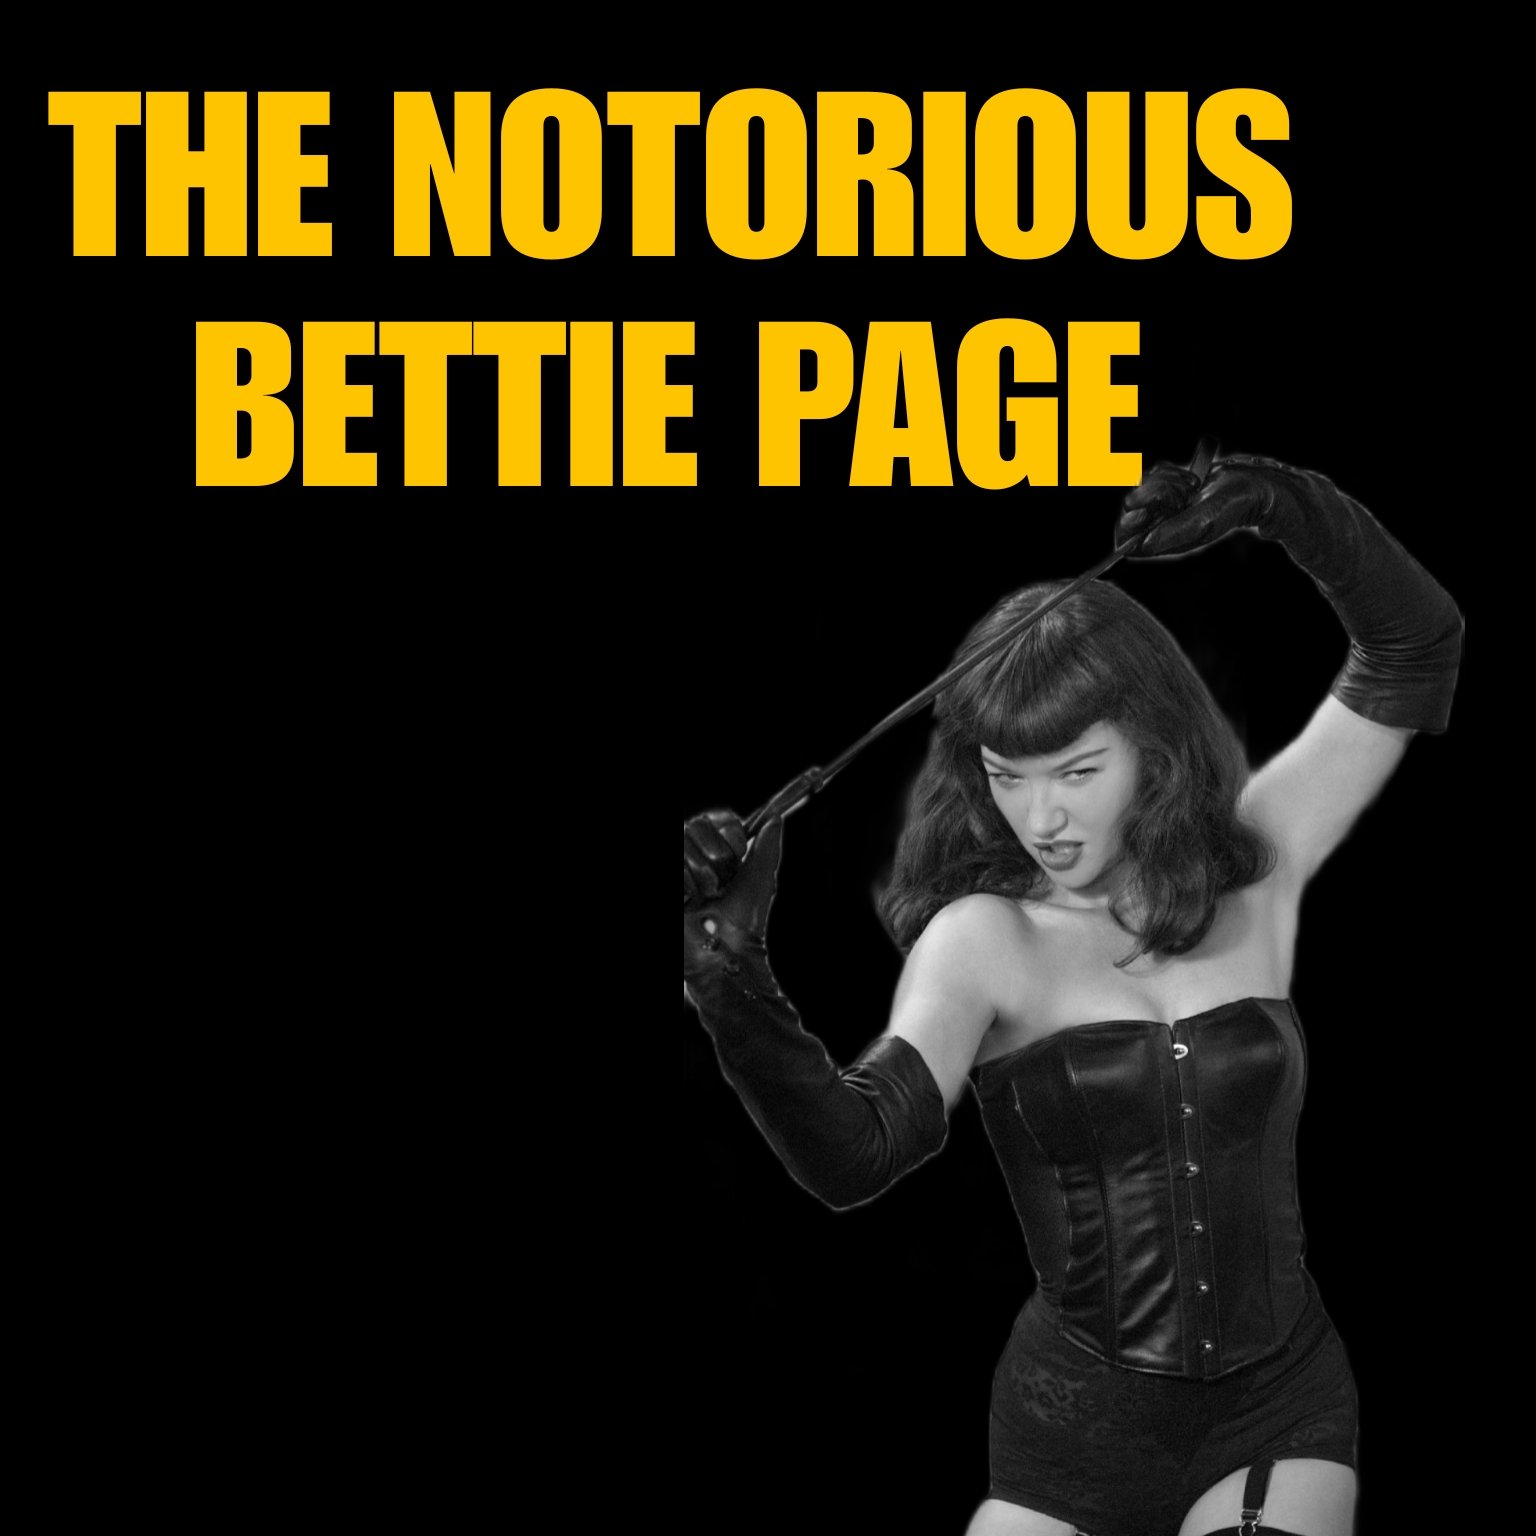 fbnf the notorious bettie page.jpg